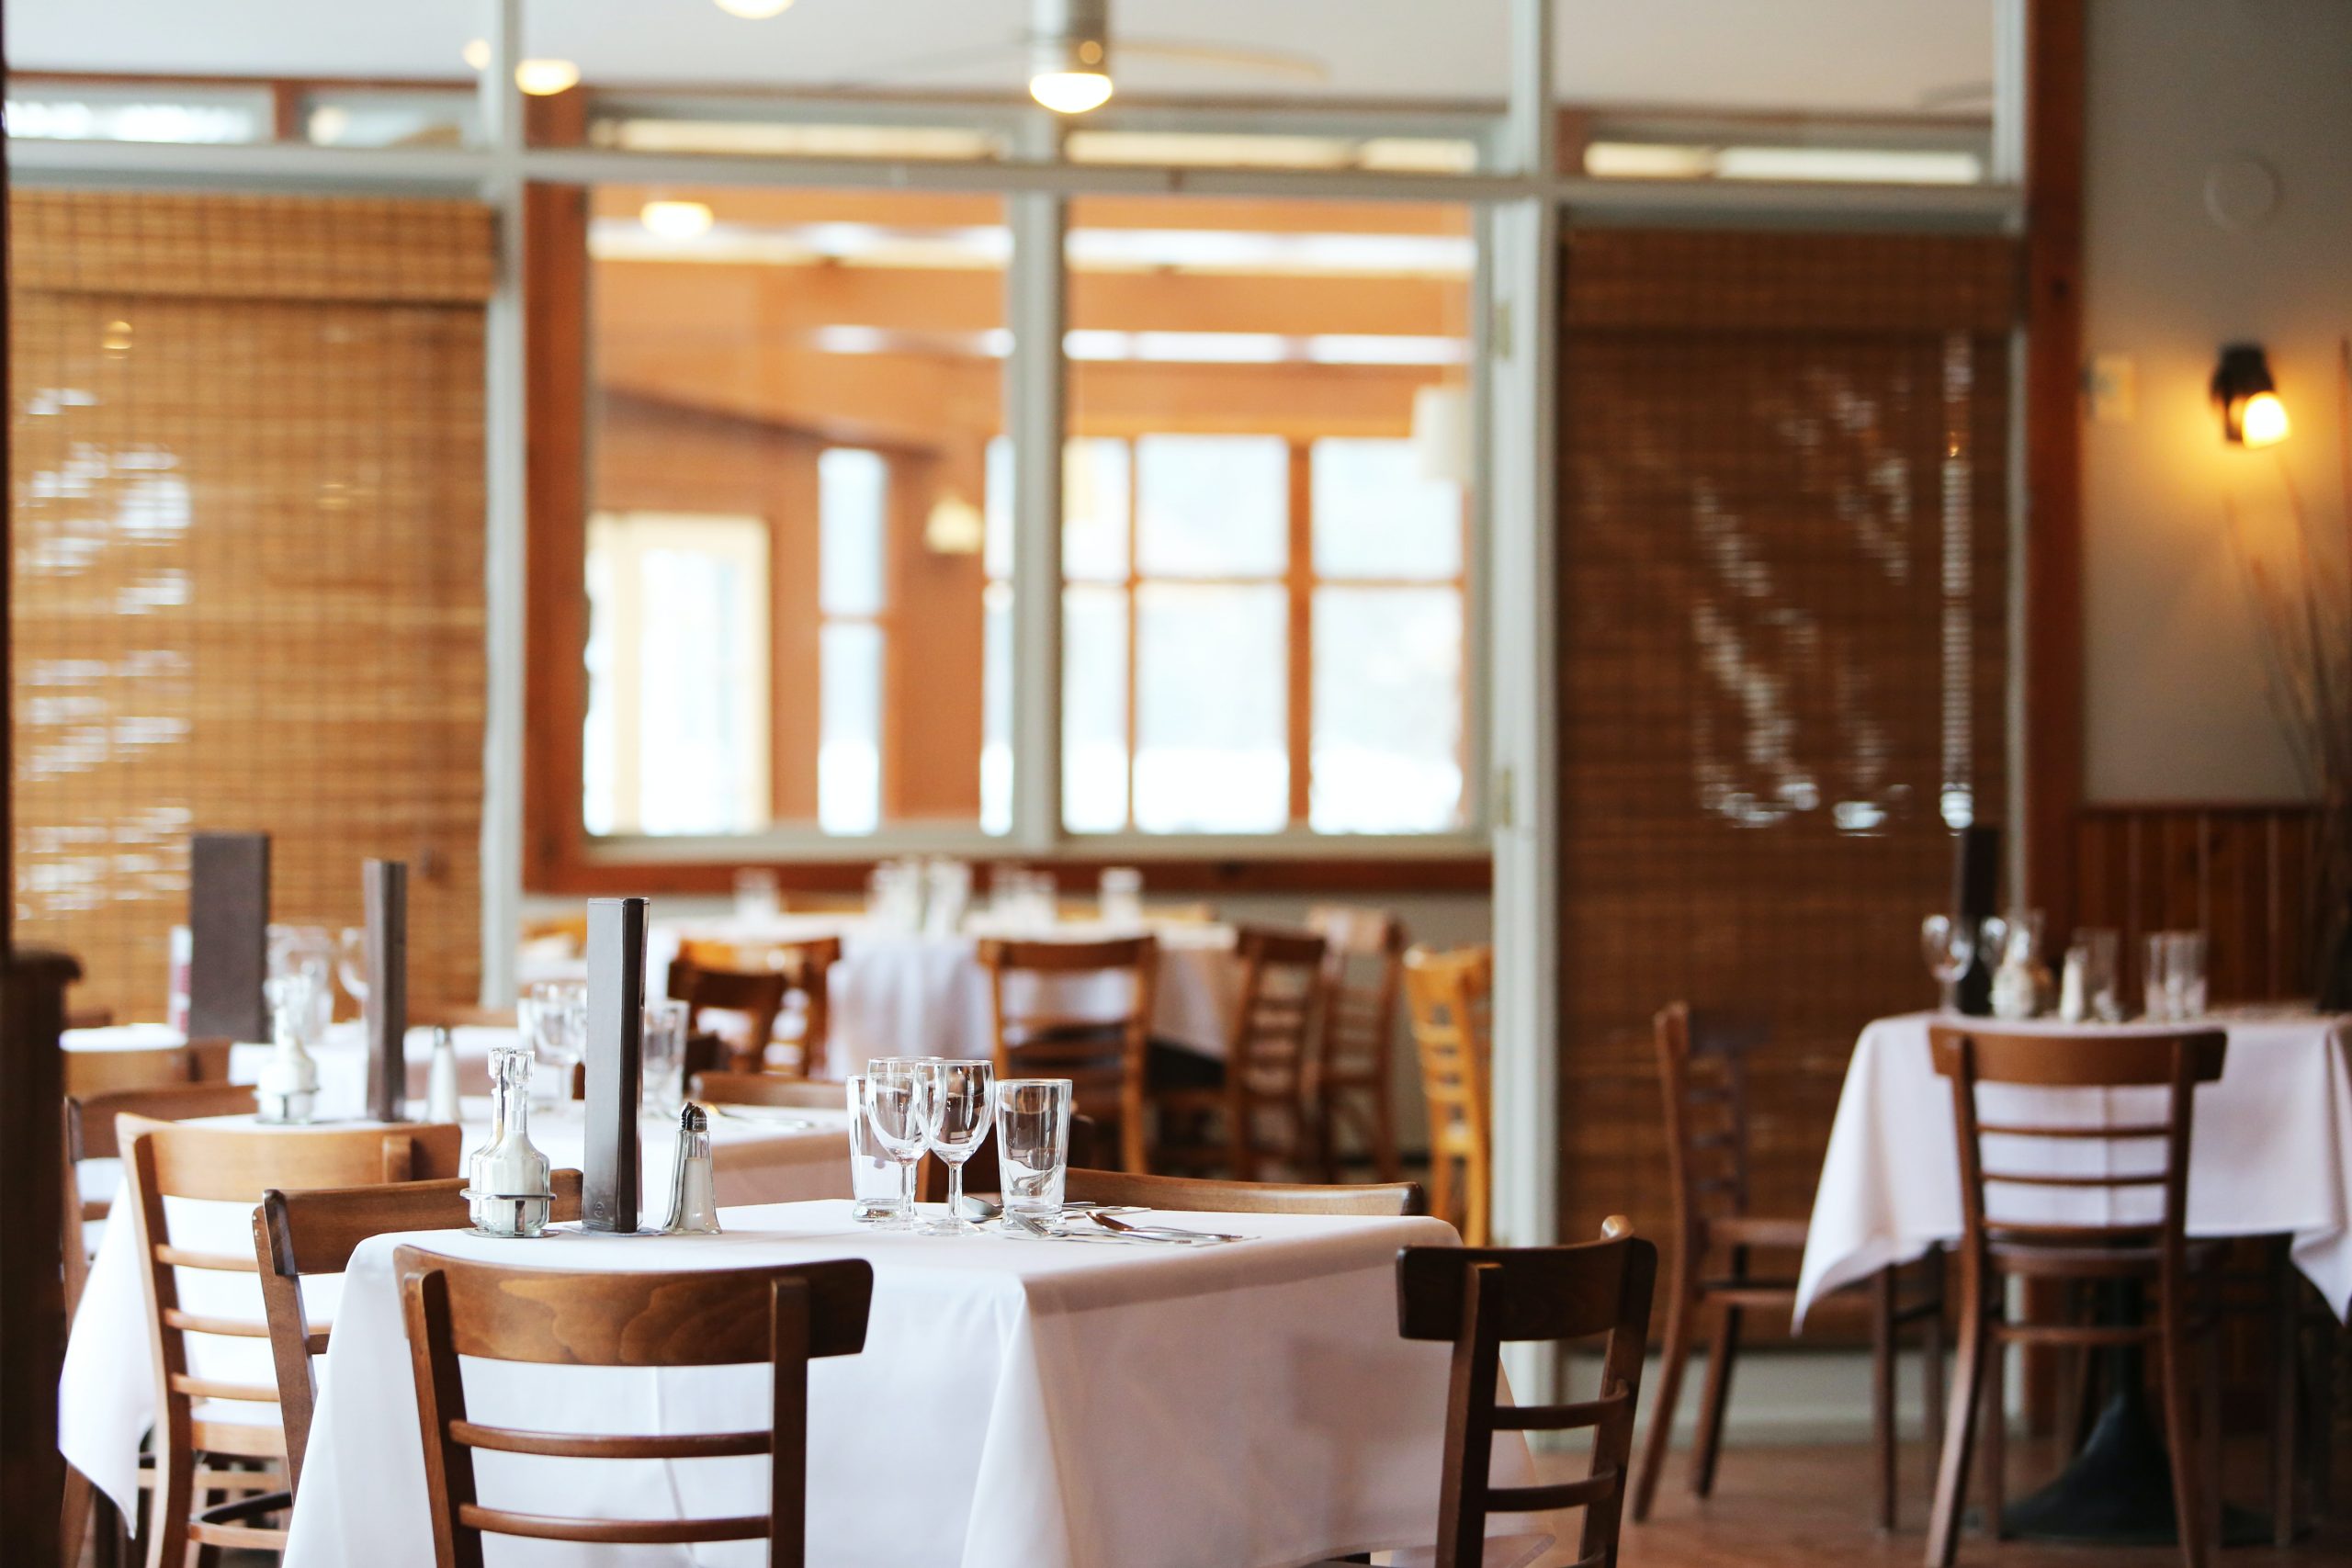 Restaurant Accounting Services in Tysons